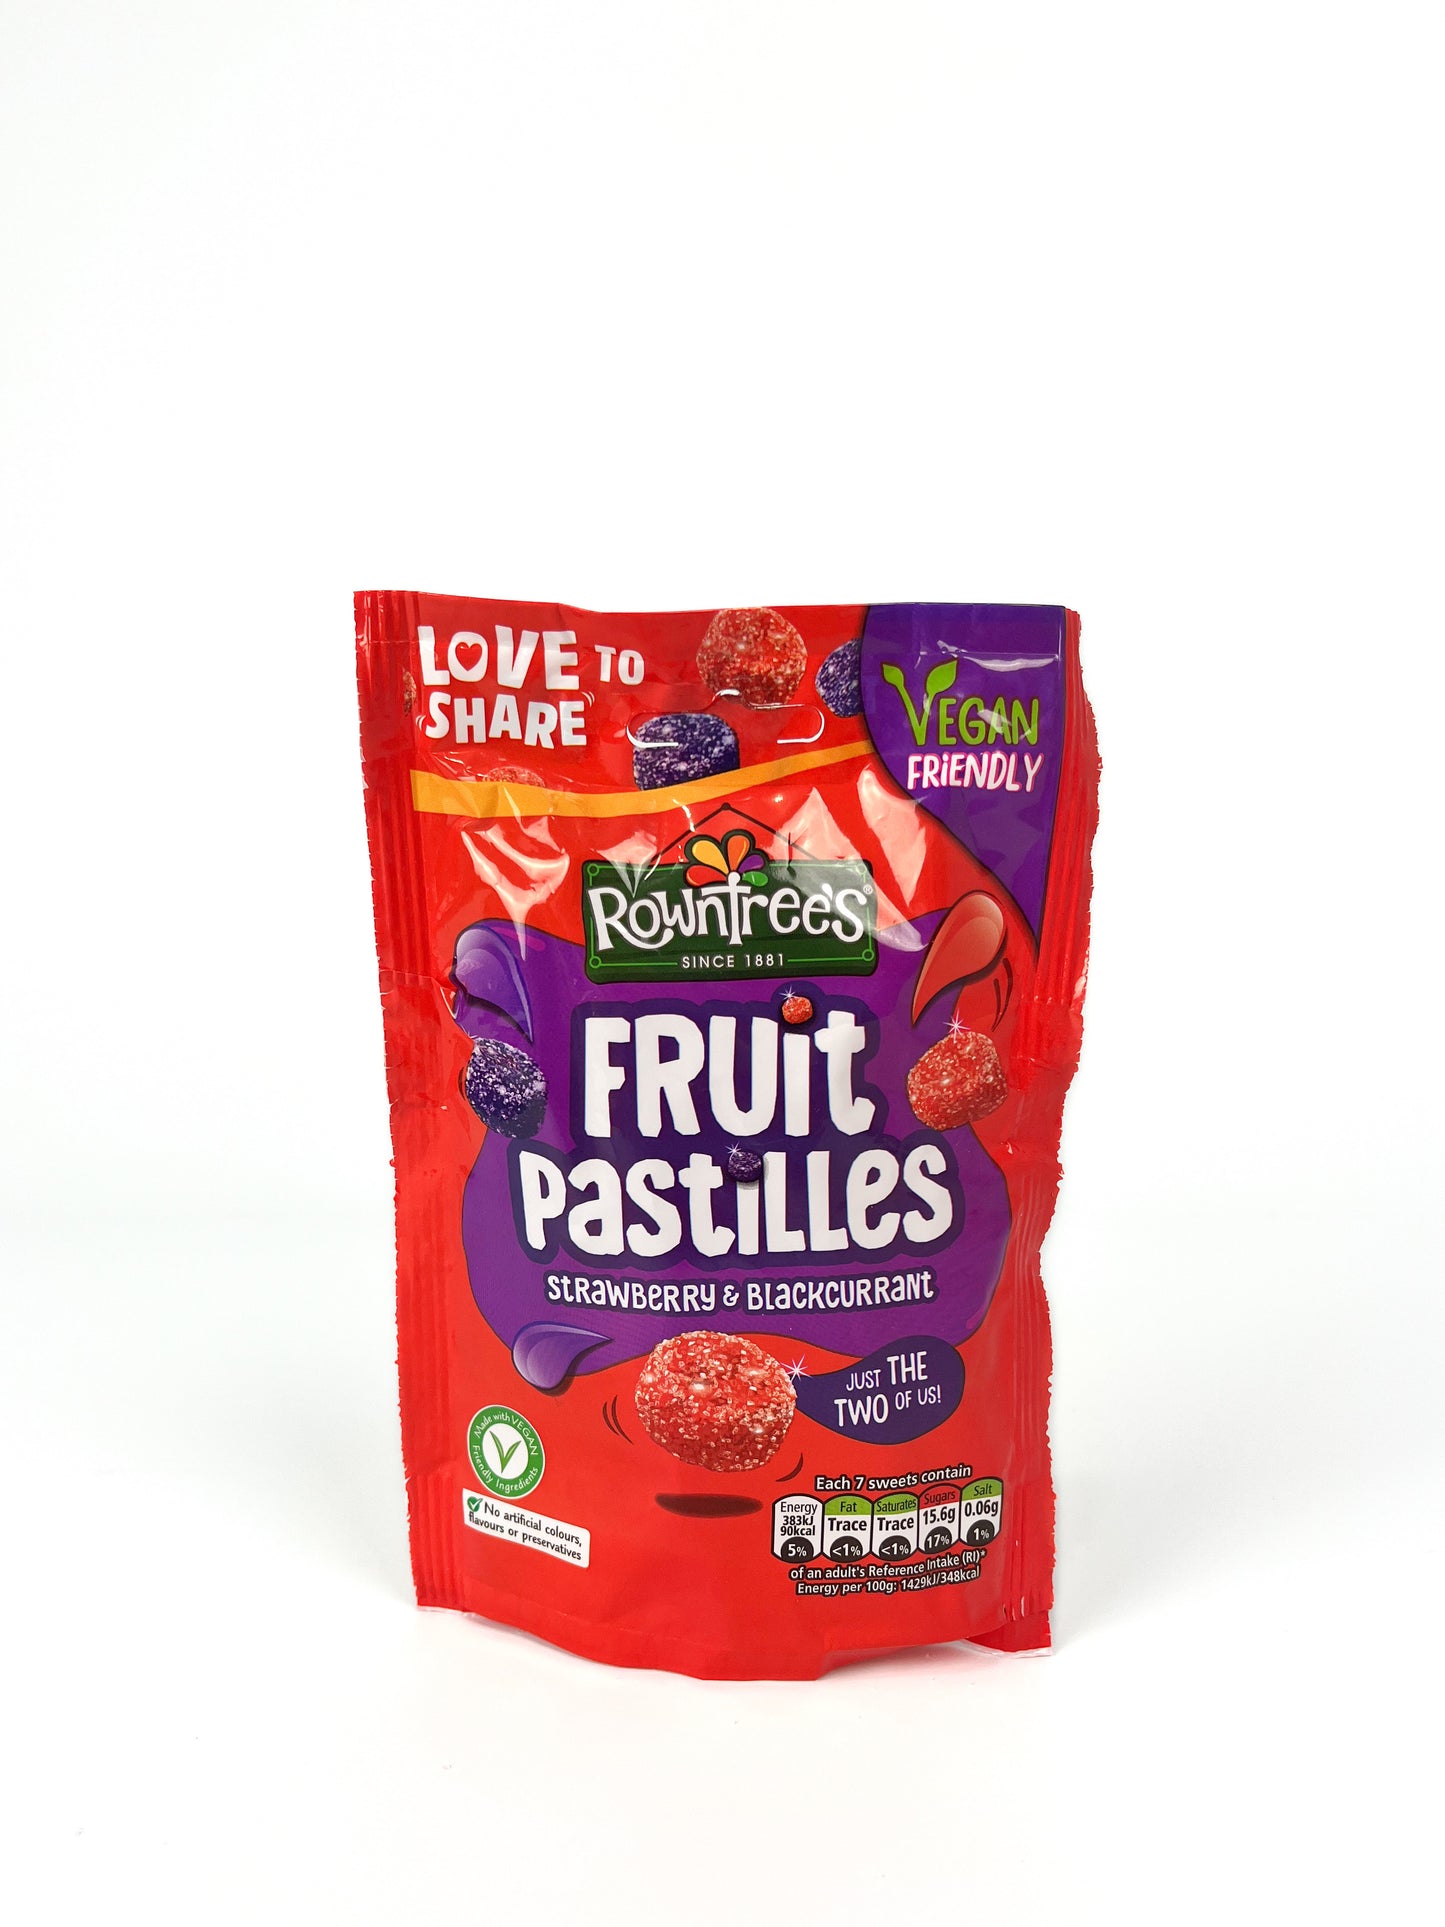 A package of Rowntree strawberry and blackcurrant flavoured fruit pastilles.